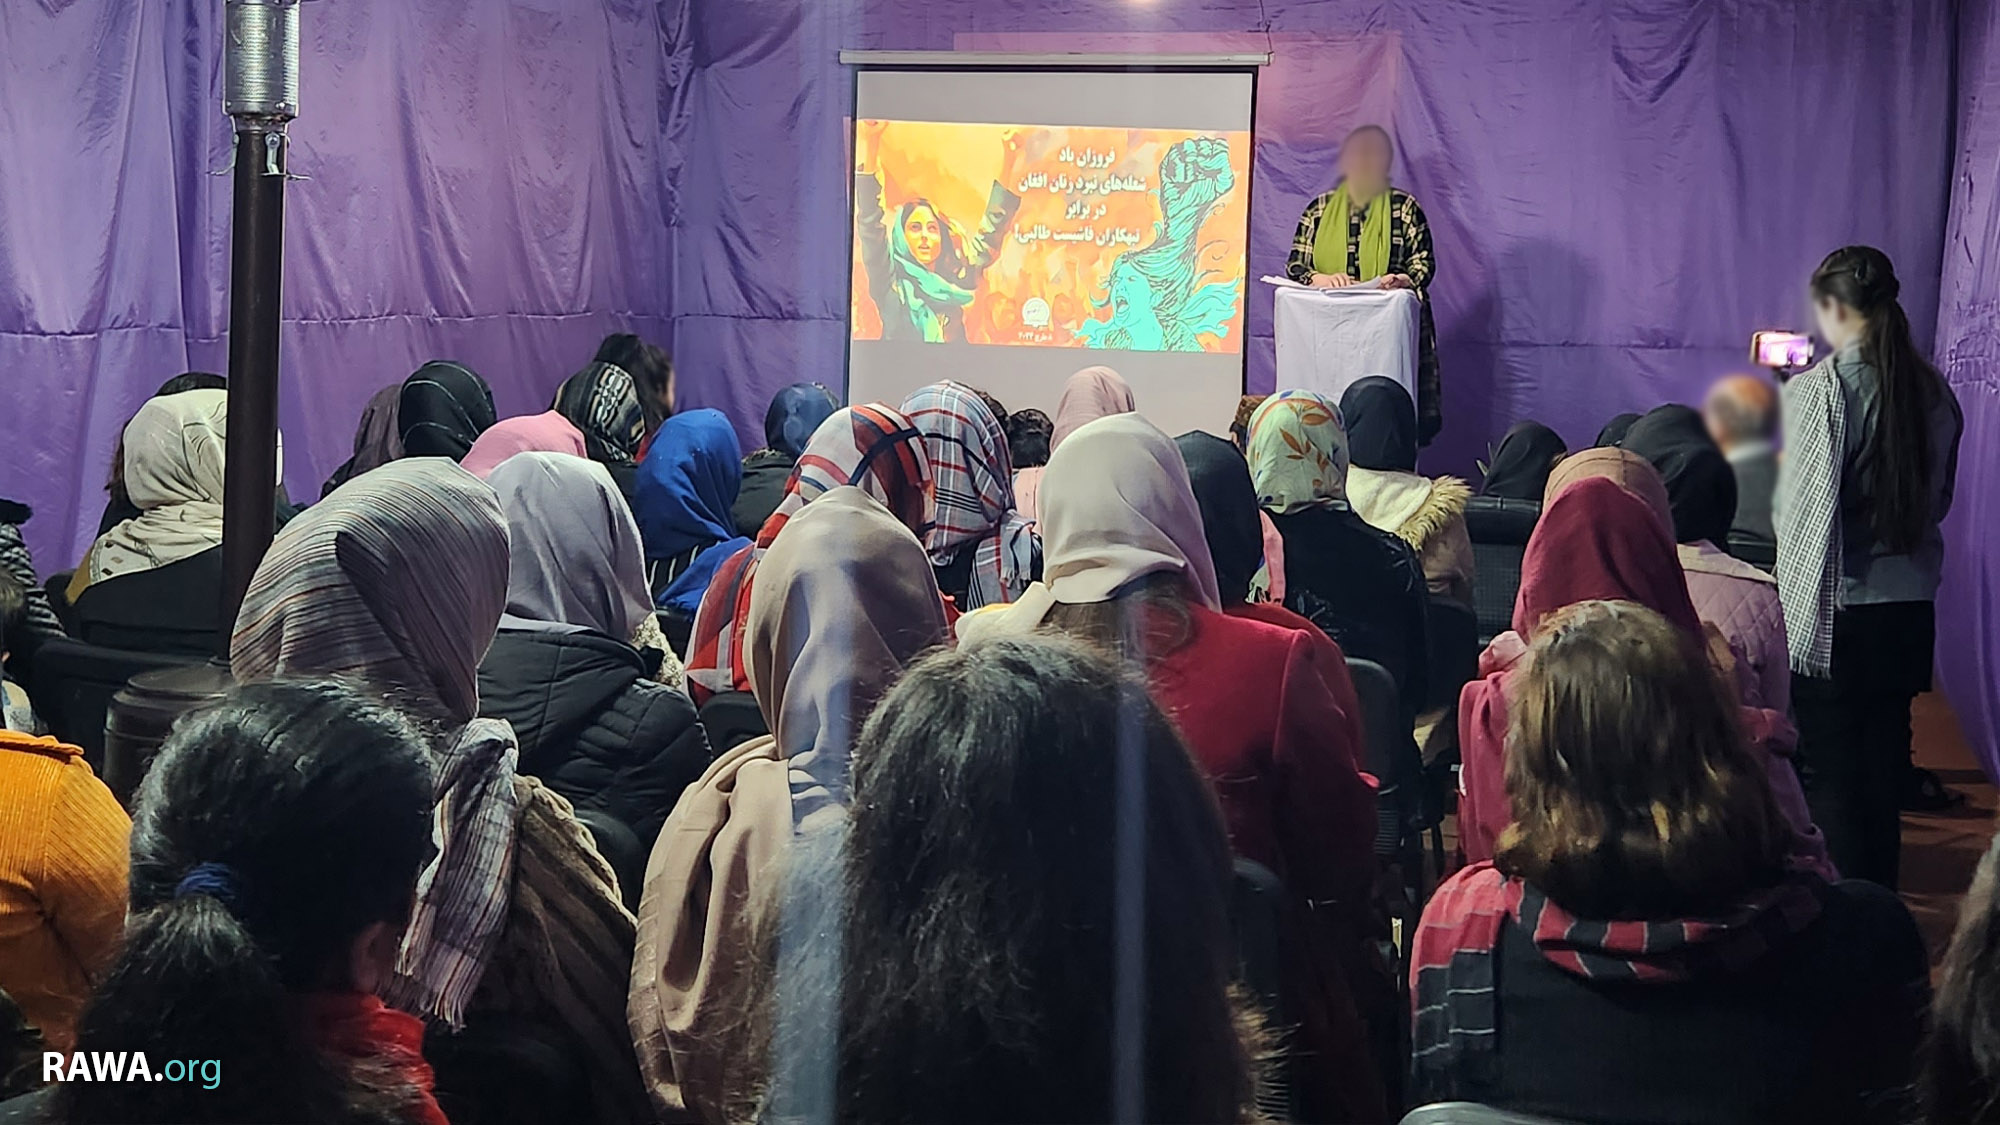 RAWA event on the International Women's Day under the rule of the Taliban